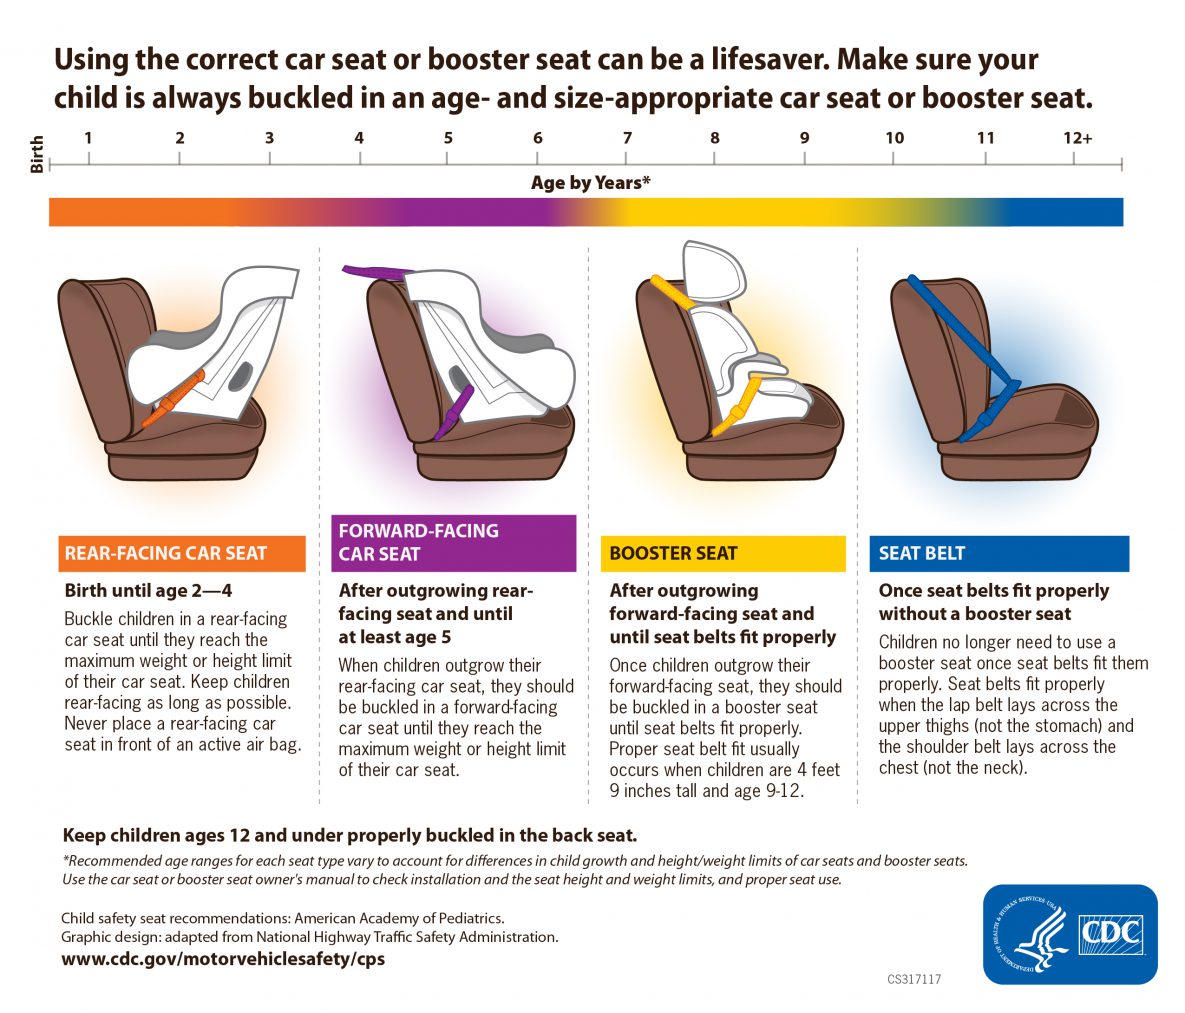 Washington Dc Car Seat Laws Regan, What Age And Weight For Forward Facing Car Seat